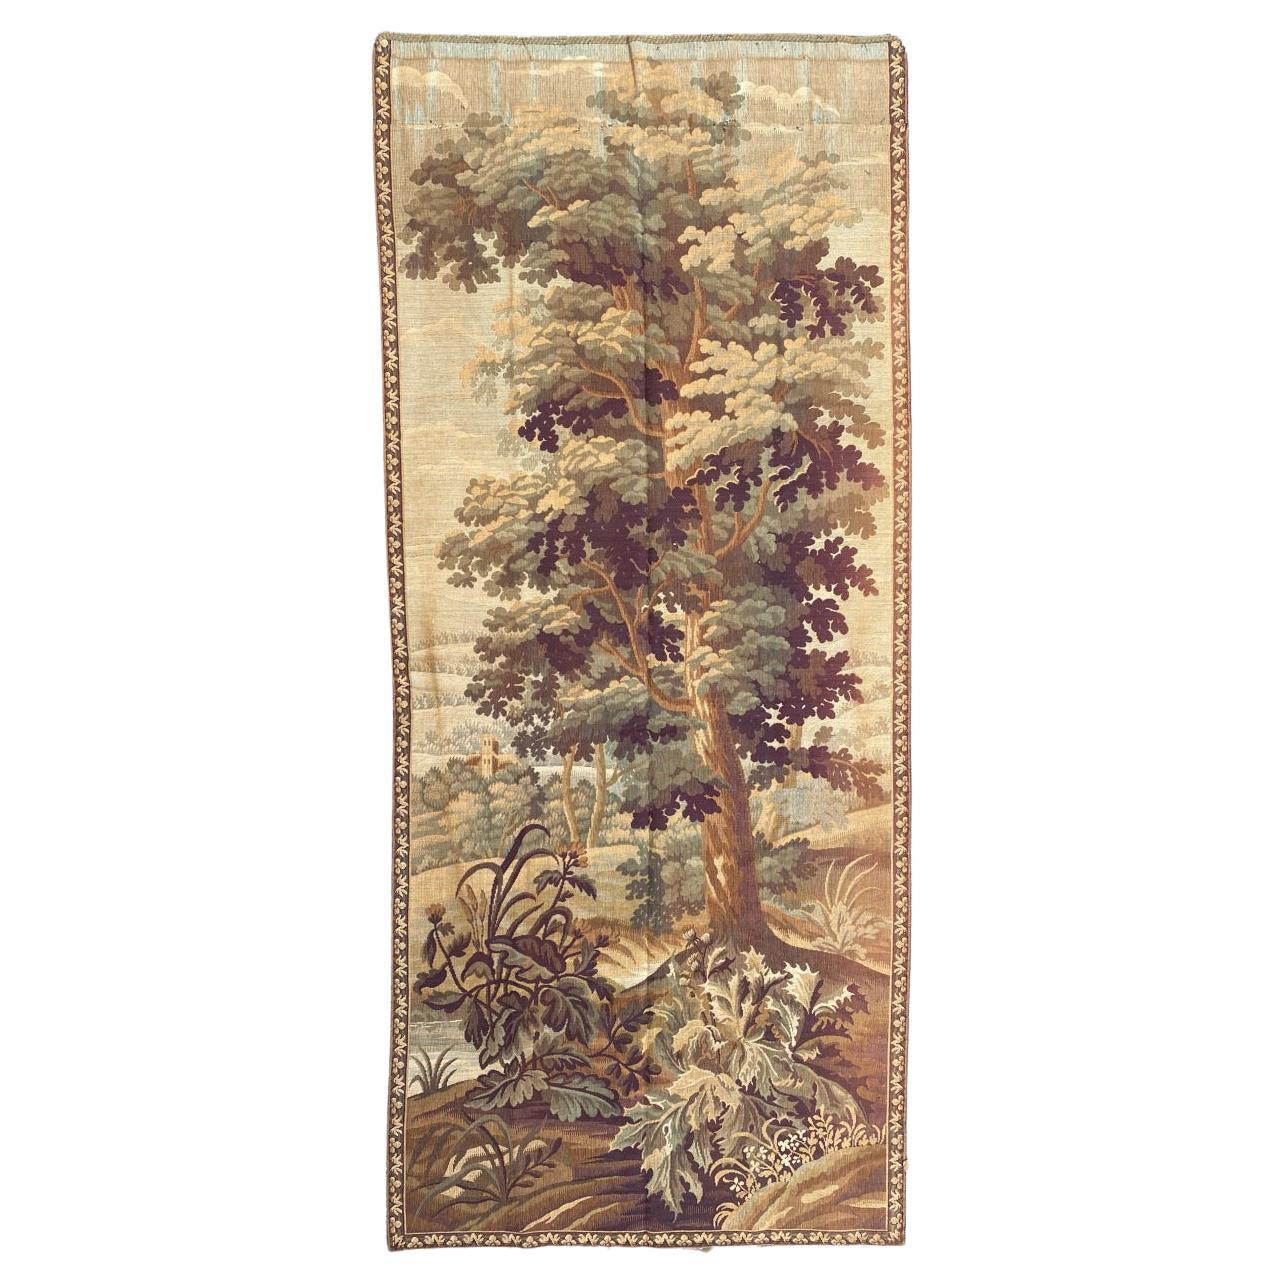 Pretty Vintage French Jaquar Tapestry Panel